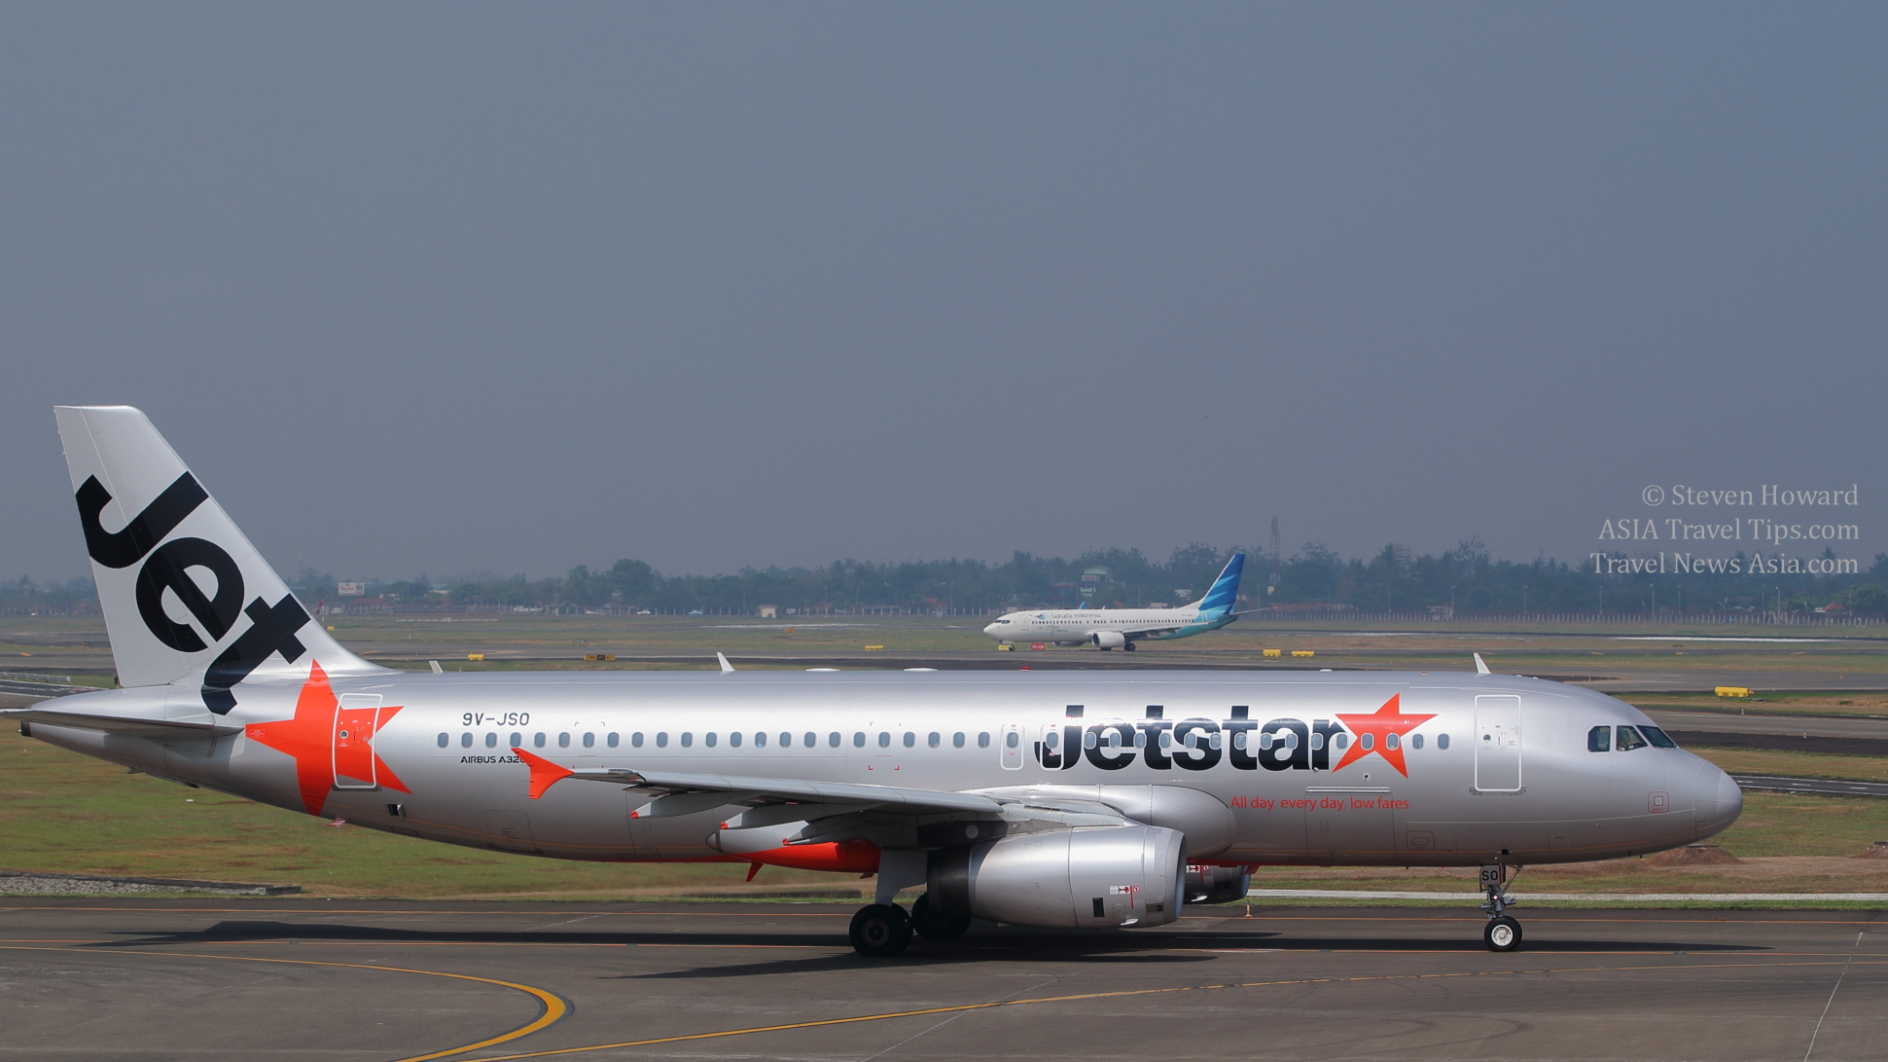 Jetstar Asia A320 reg: 9V-JSO. Picture by Steven Howard of TravelNewsAsia.com Click to enlarge.